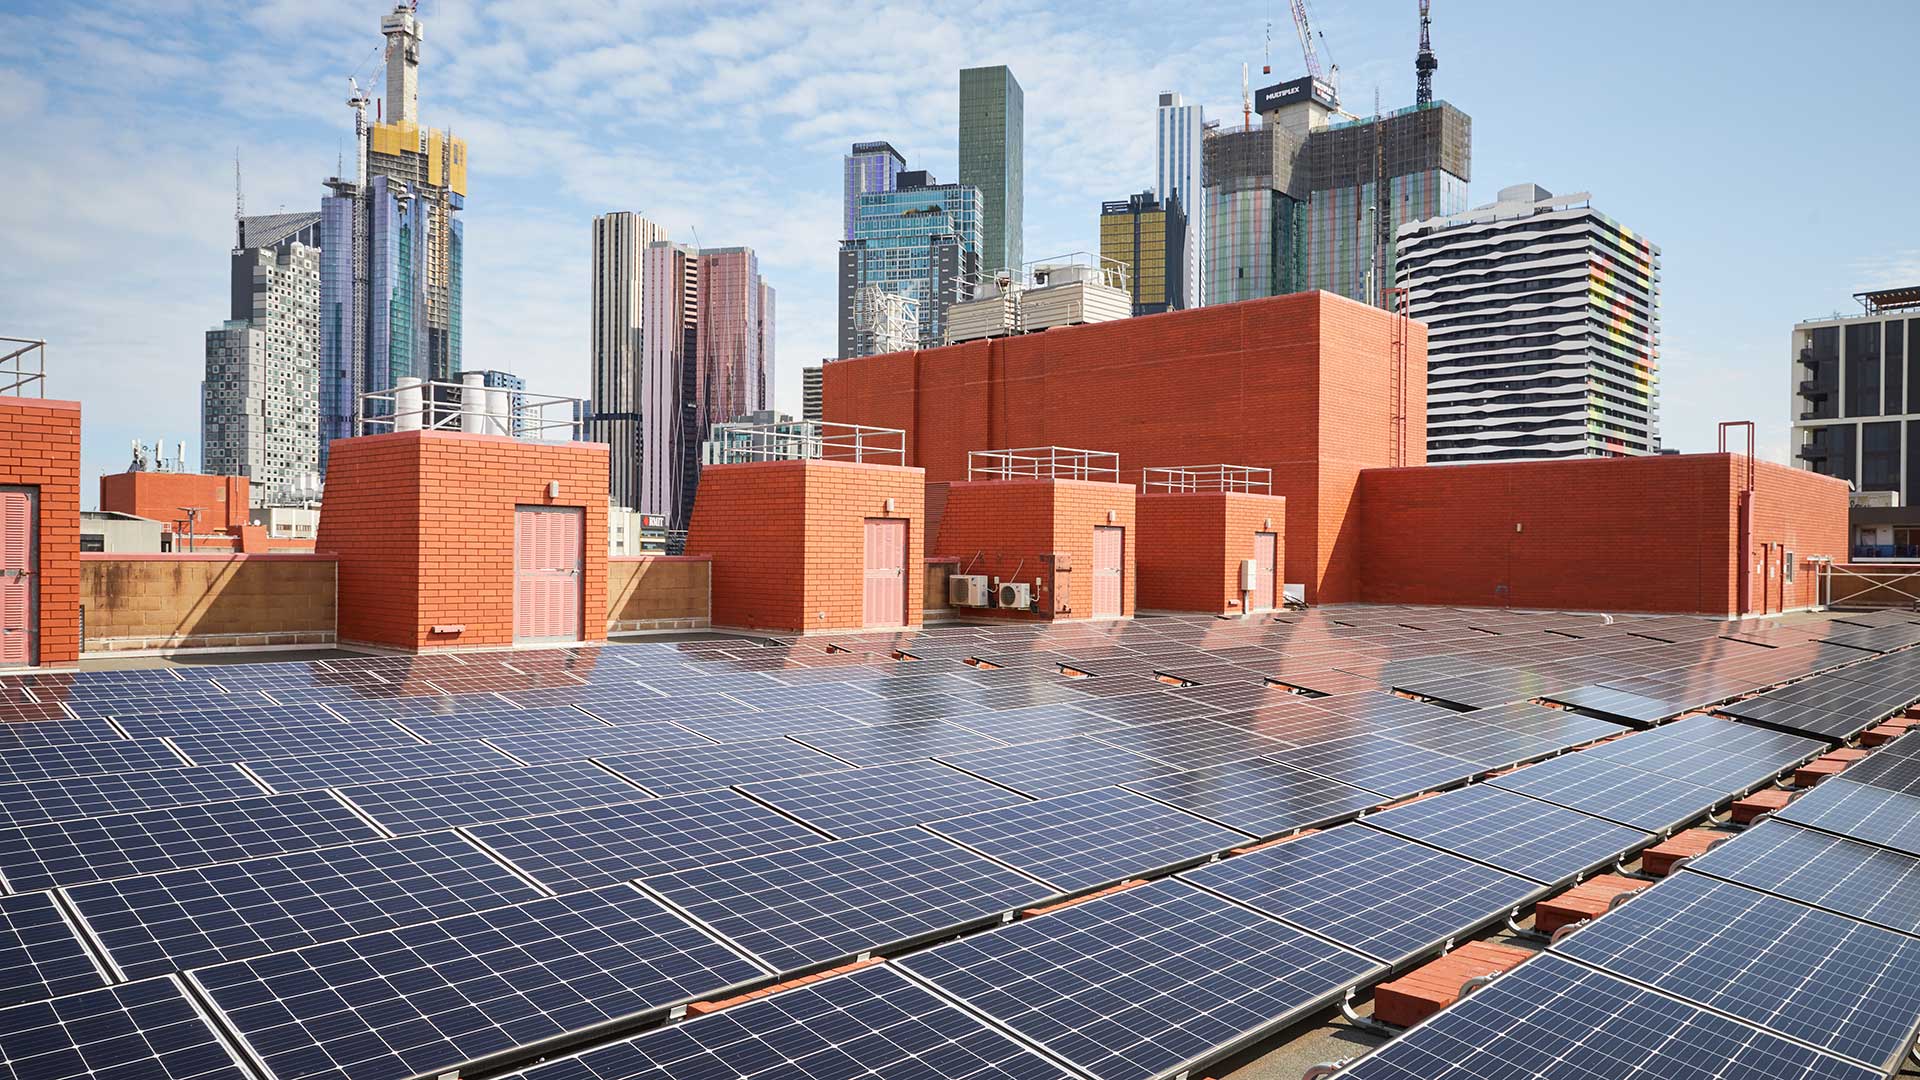 Image of solar panels on a city roof